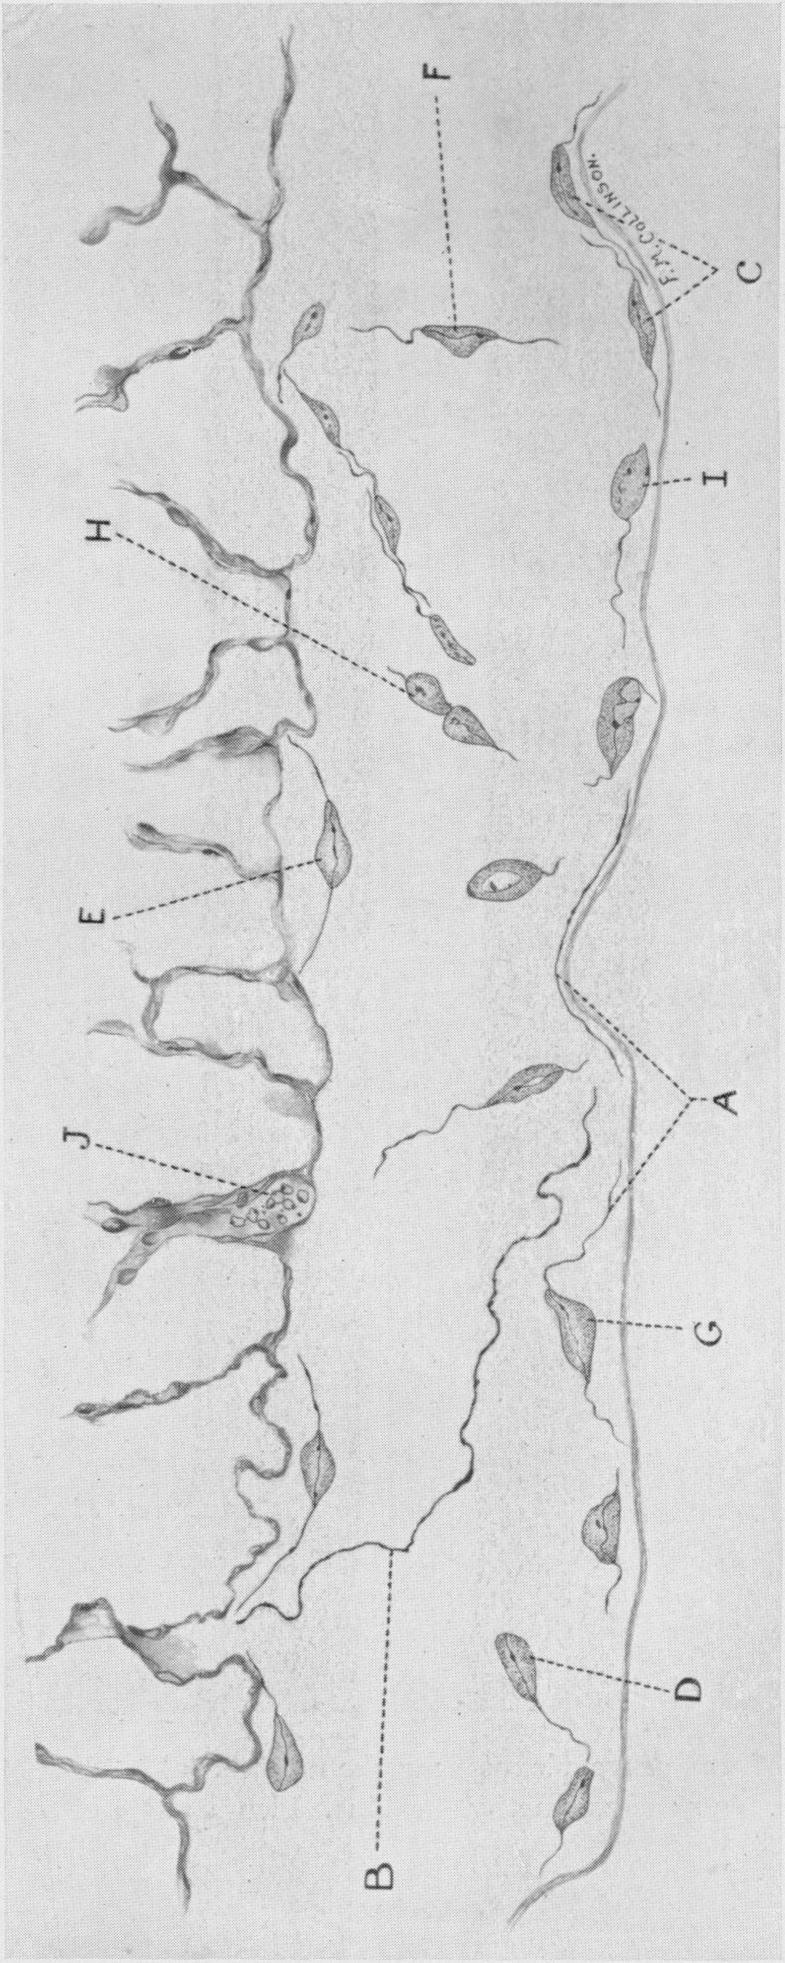 PLATE II THE JOURNAL OF PHYSIOLOGY, VOL. 80, No.